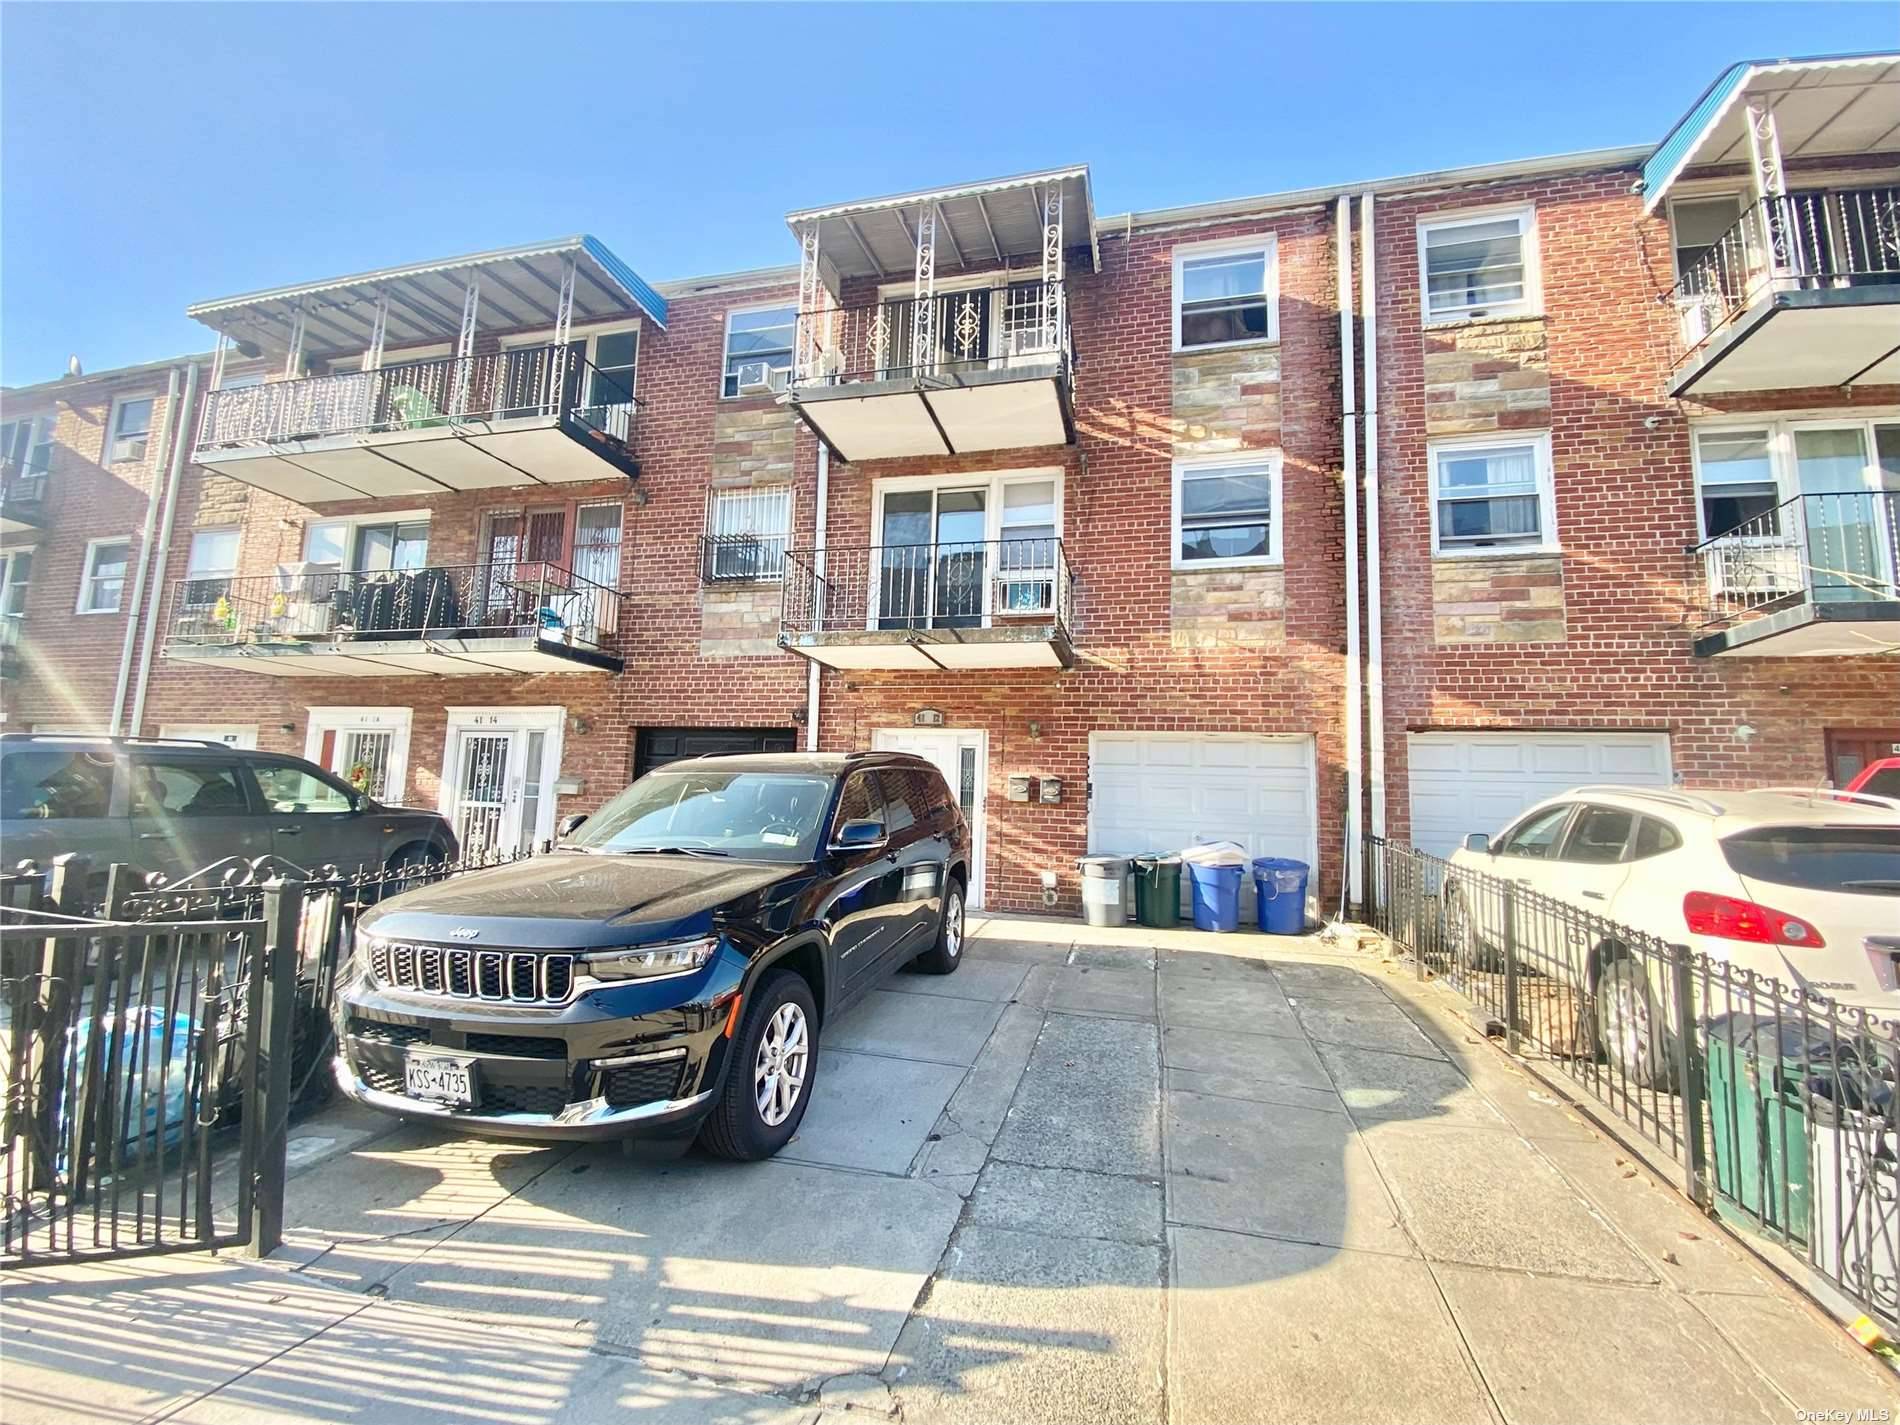 Great opportunity to own a large two family house in prime Astoria location, just a block from 30th Avenue and right off Steinway street !